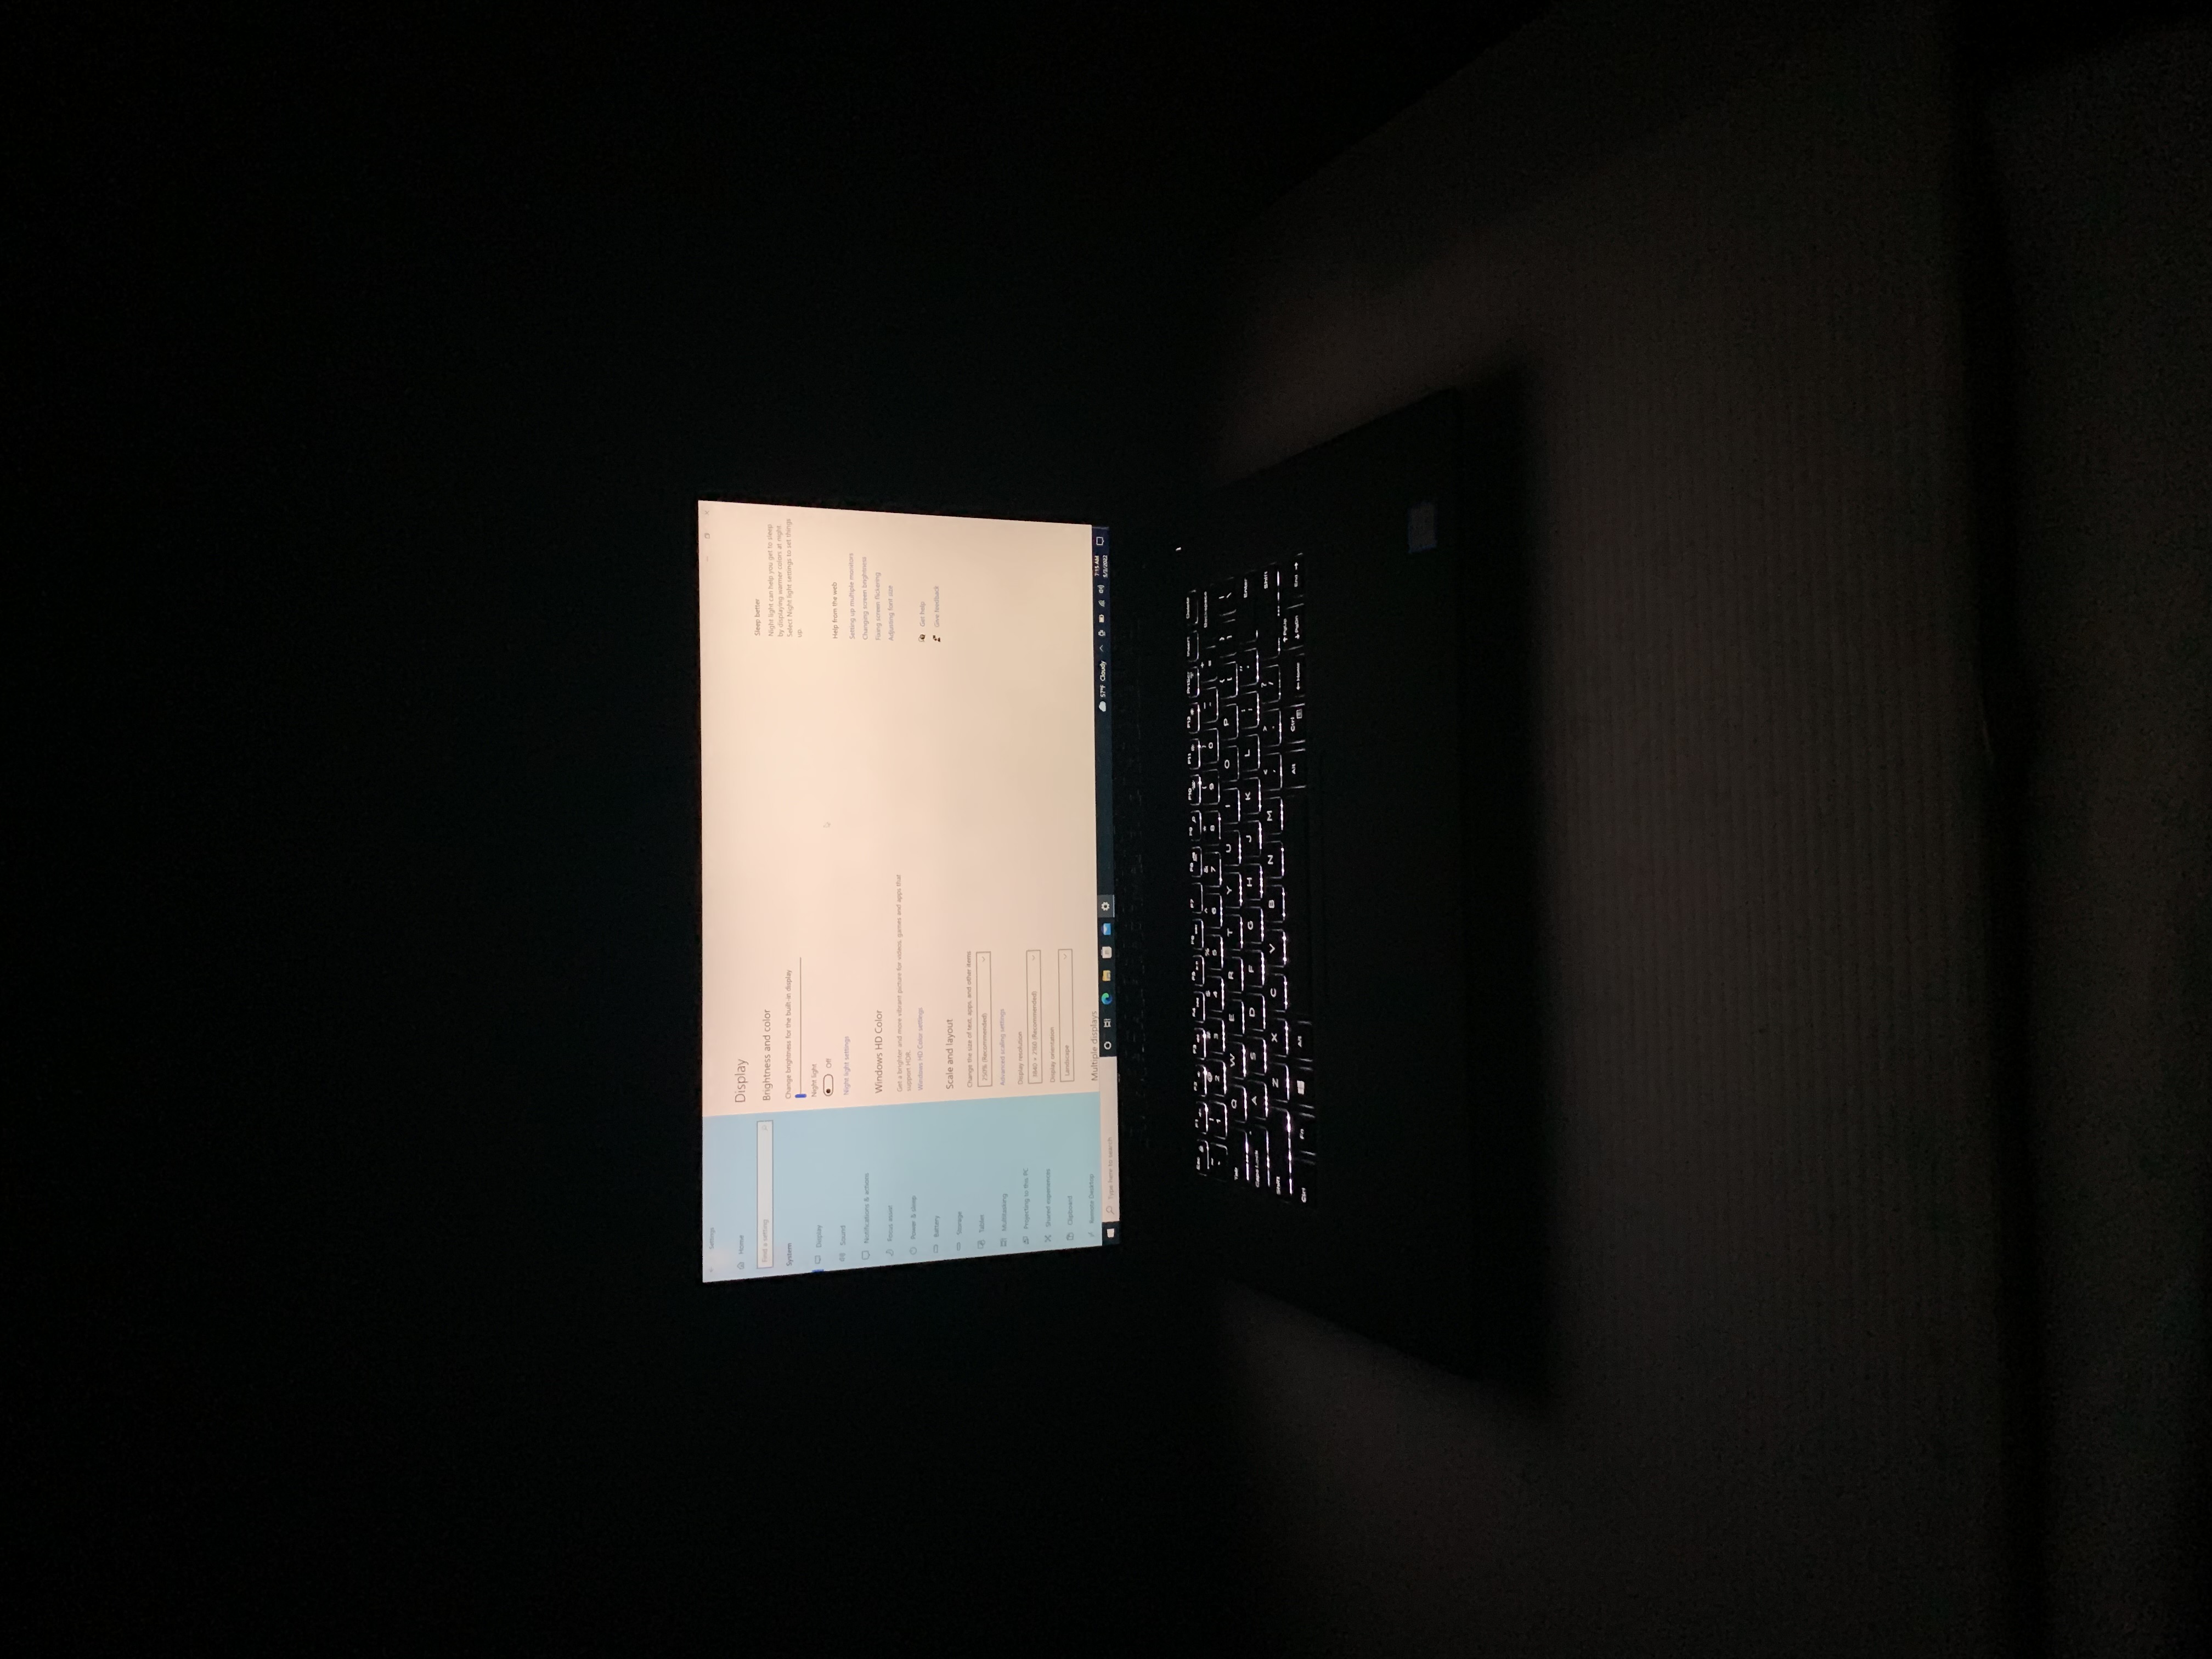 Dell XPS 15 9560 in the dark, showcasing its backlit keyboard